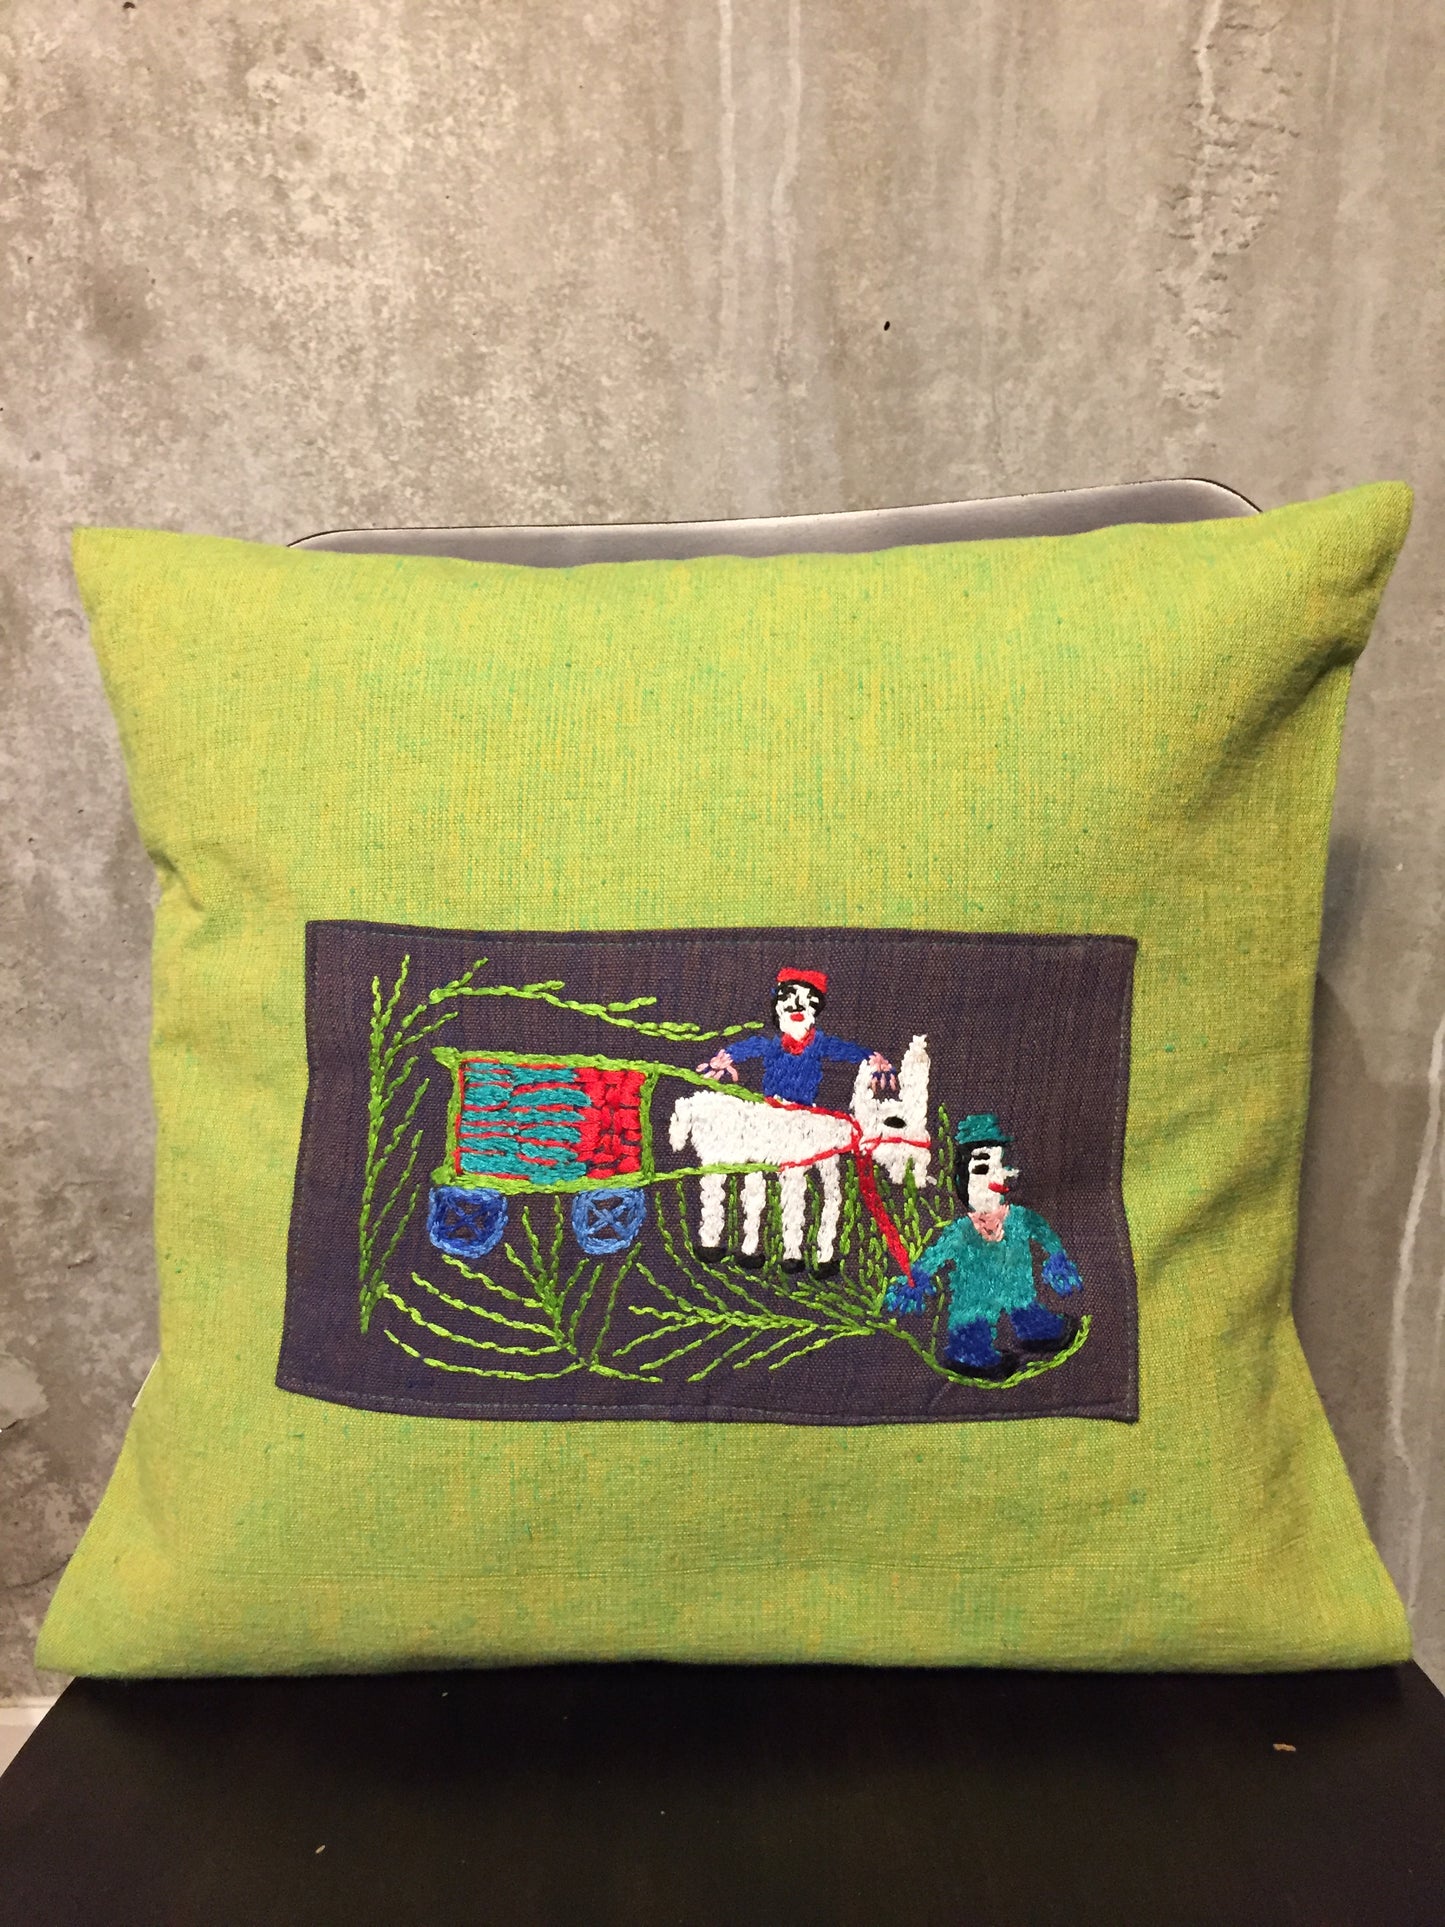 Handwoven Egyptian Cotton Cushion Cover - Hand Embroidered Art - Donkey Drawn Cart